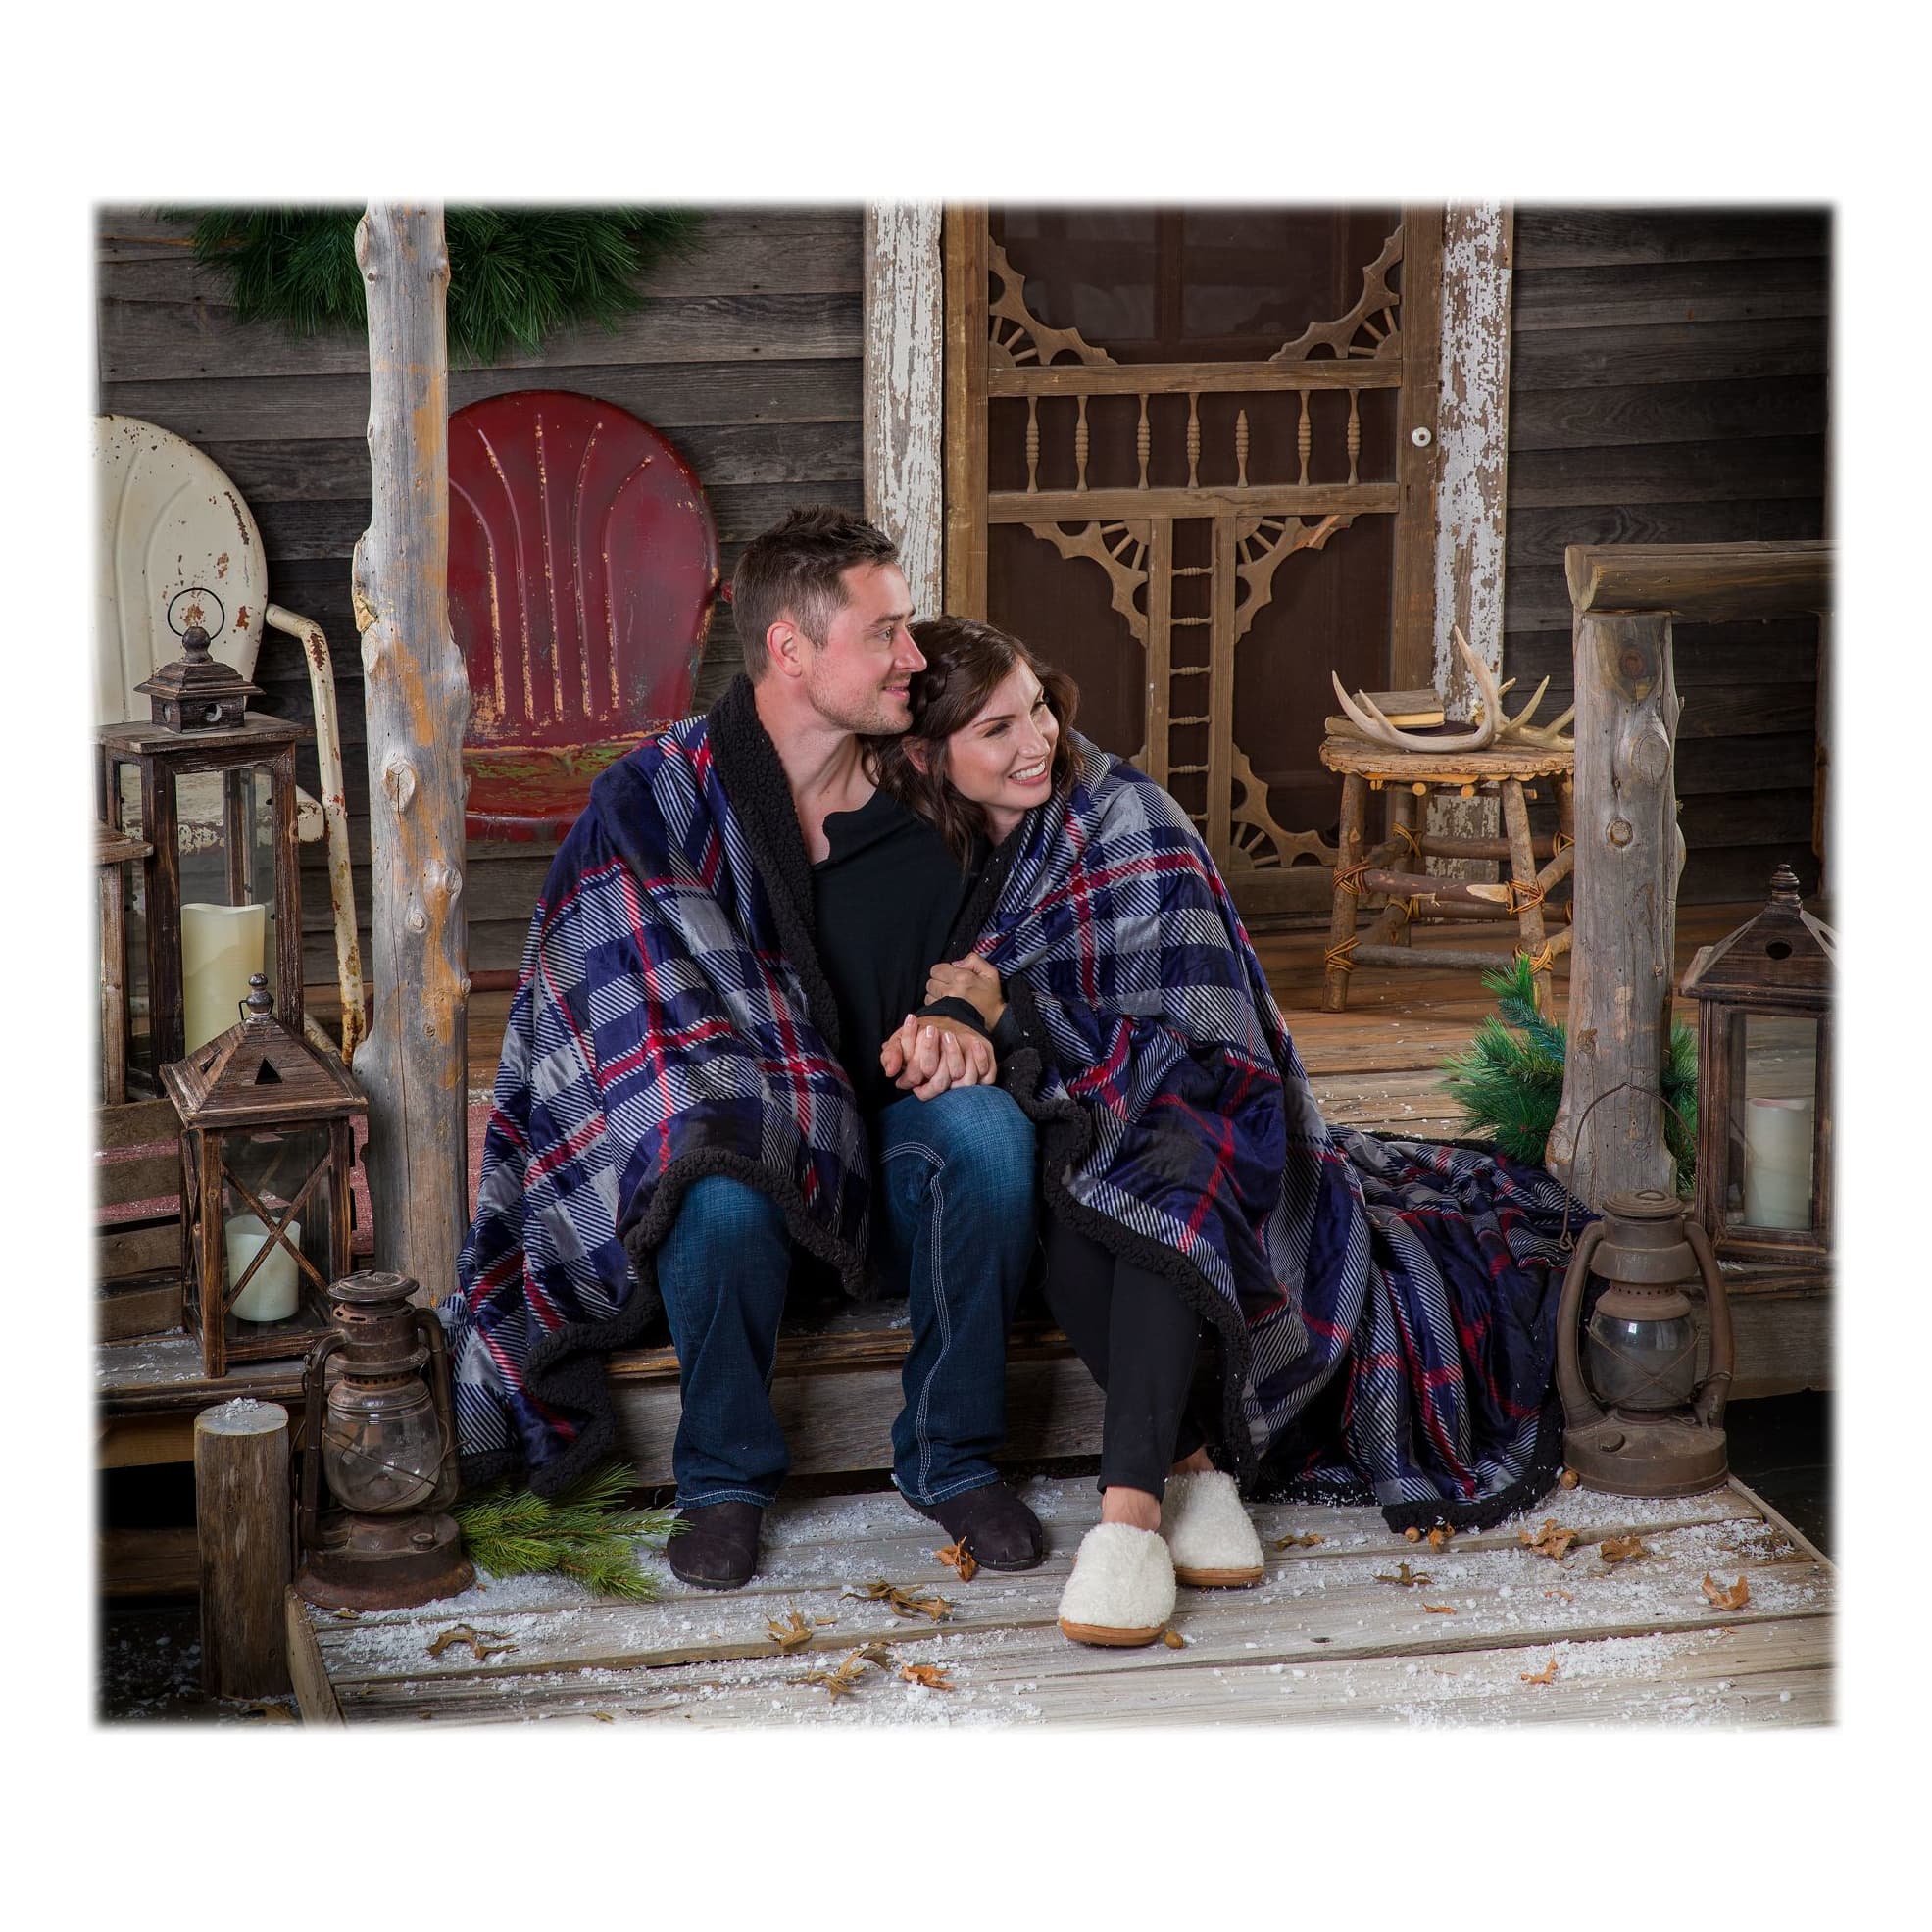 White River® Giant Berber Throw - Navy Plaid - In the Field